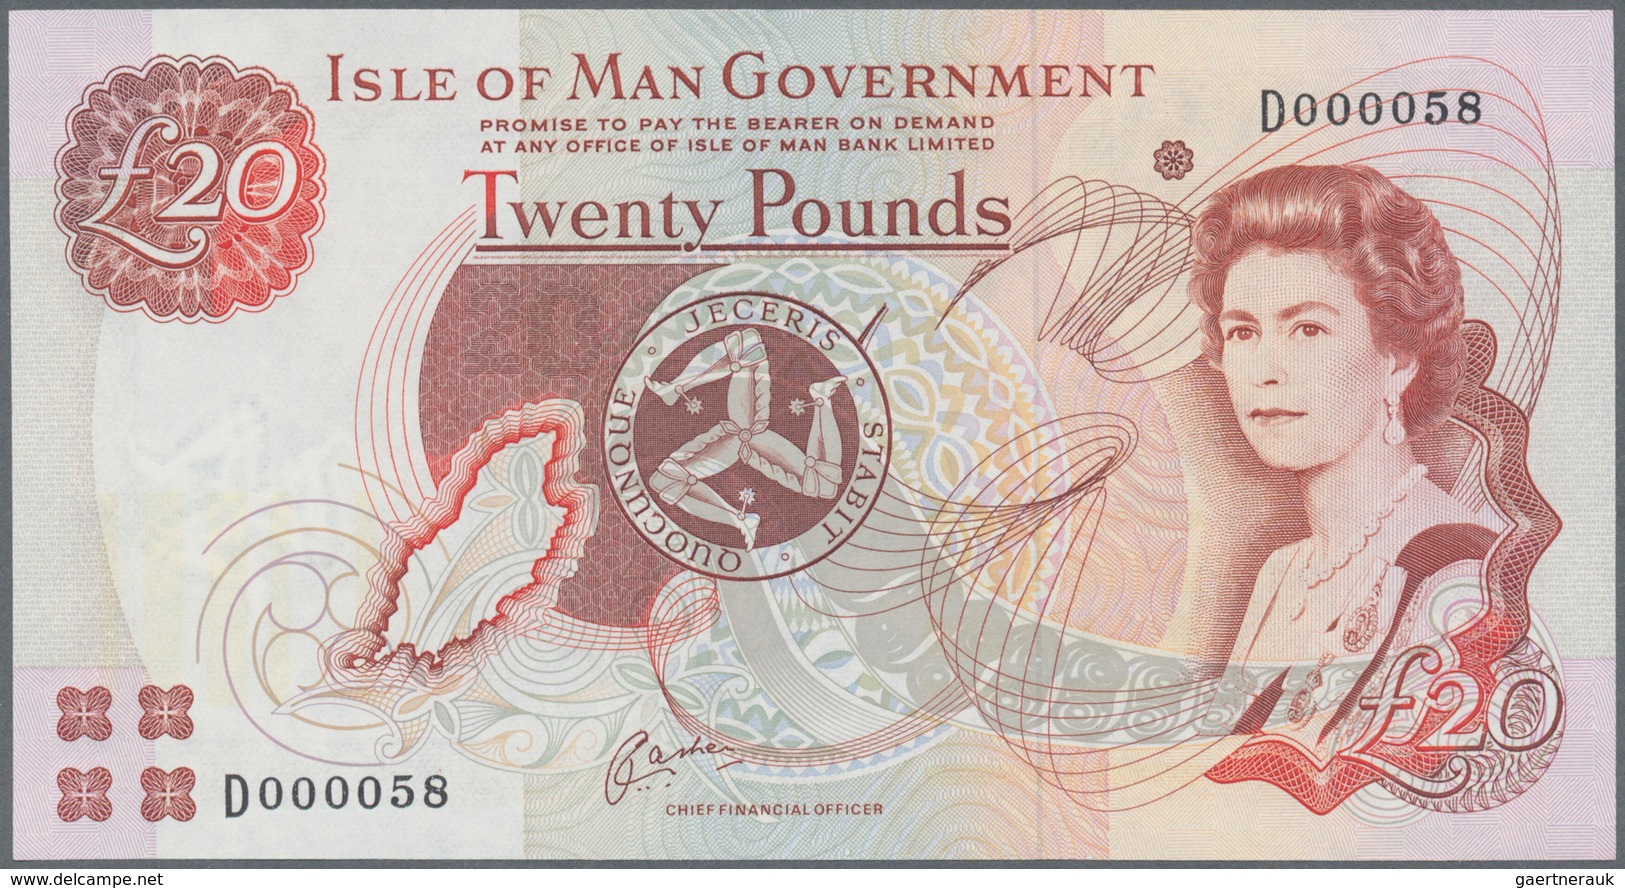 01834 Isle of Man: Set with 4 Banknotes 1, 5, 10 and 20 Pounds ND(1990-2009), P.40b, 41b, 42b, 43b, all in